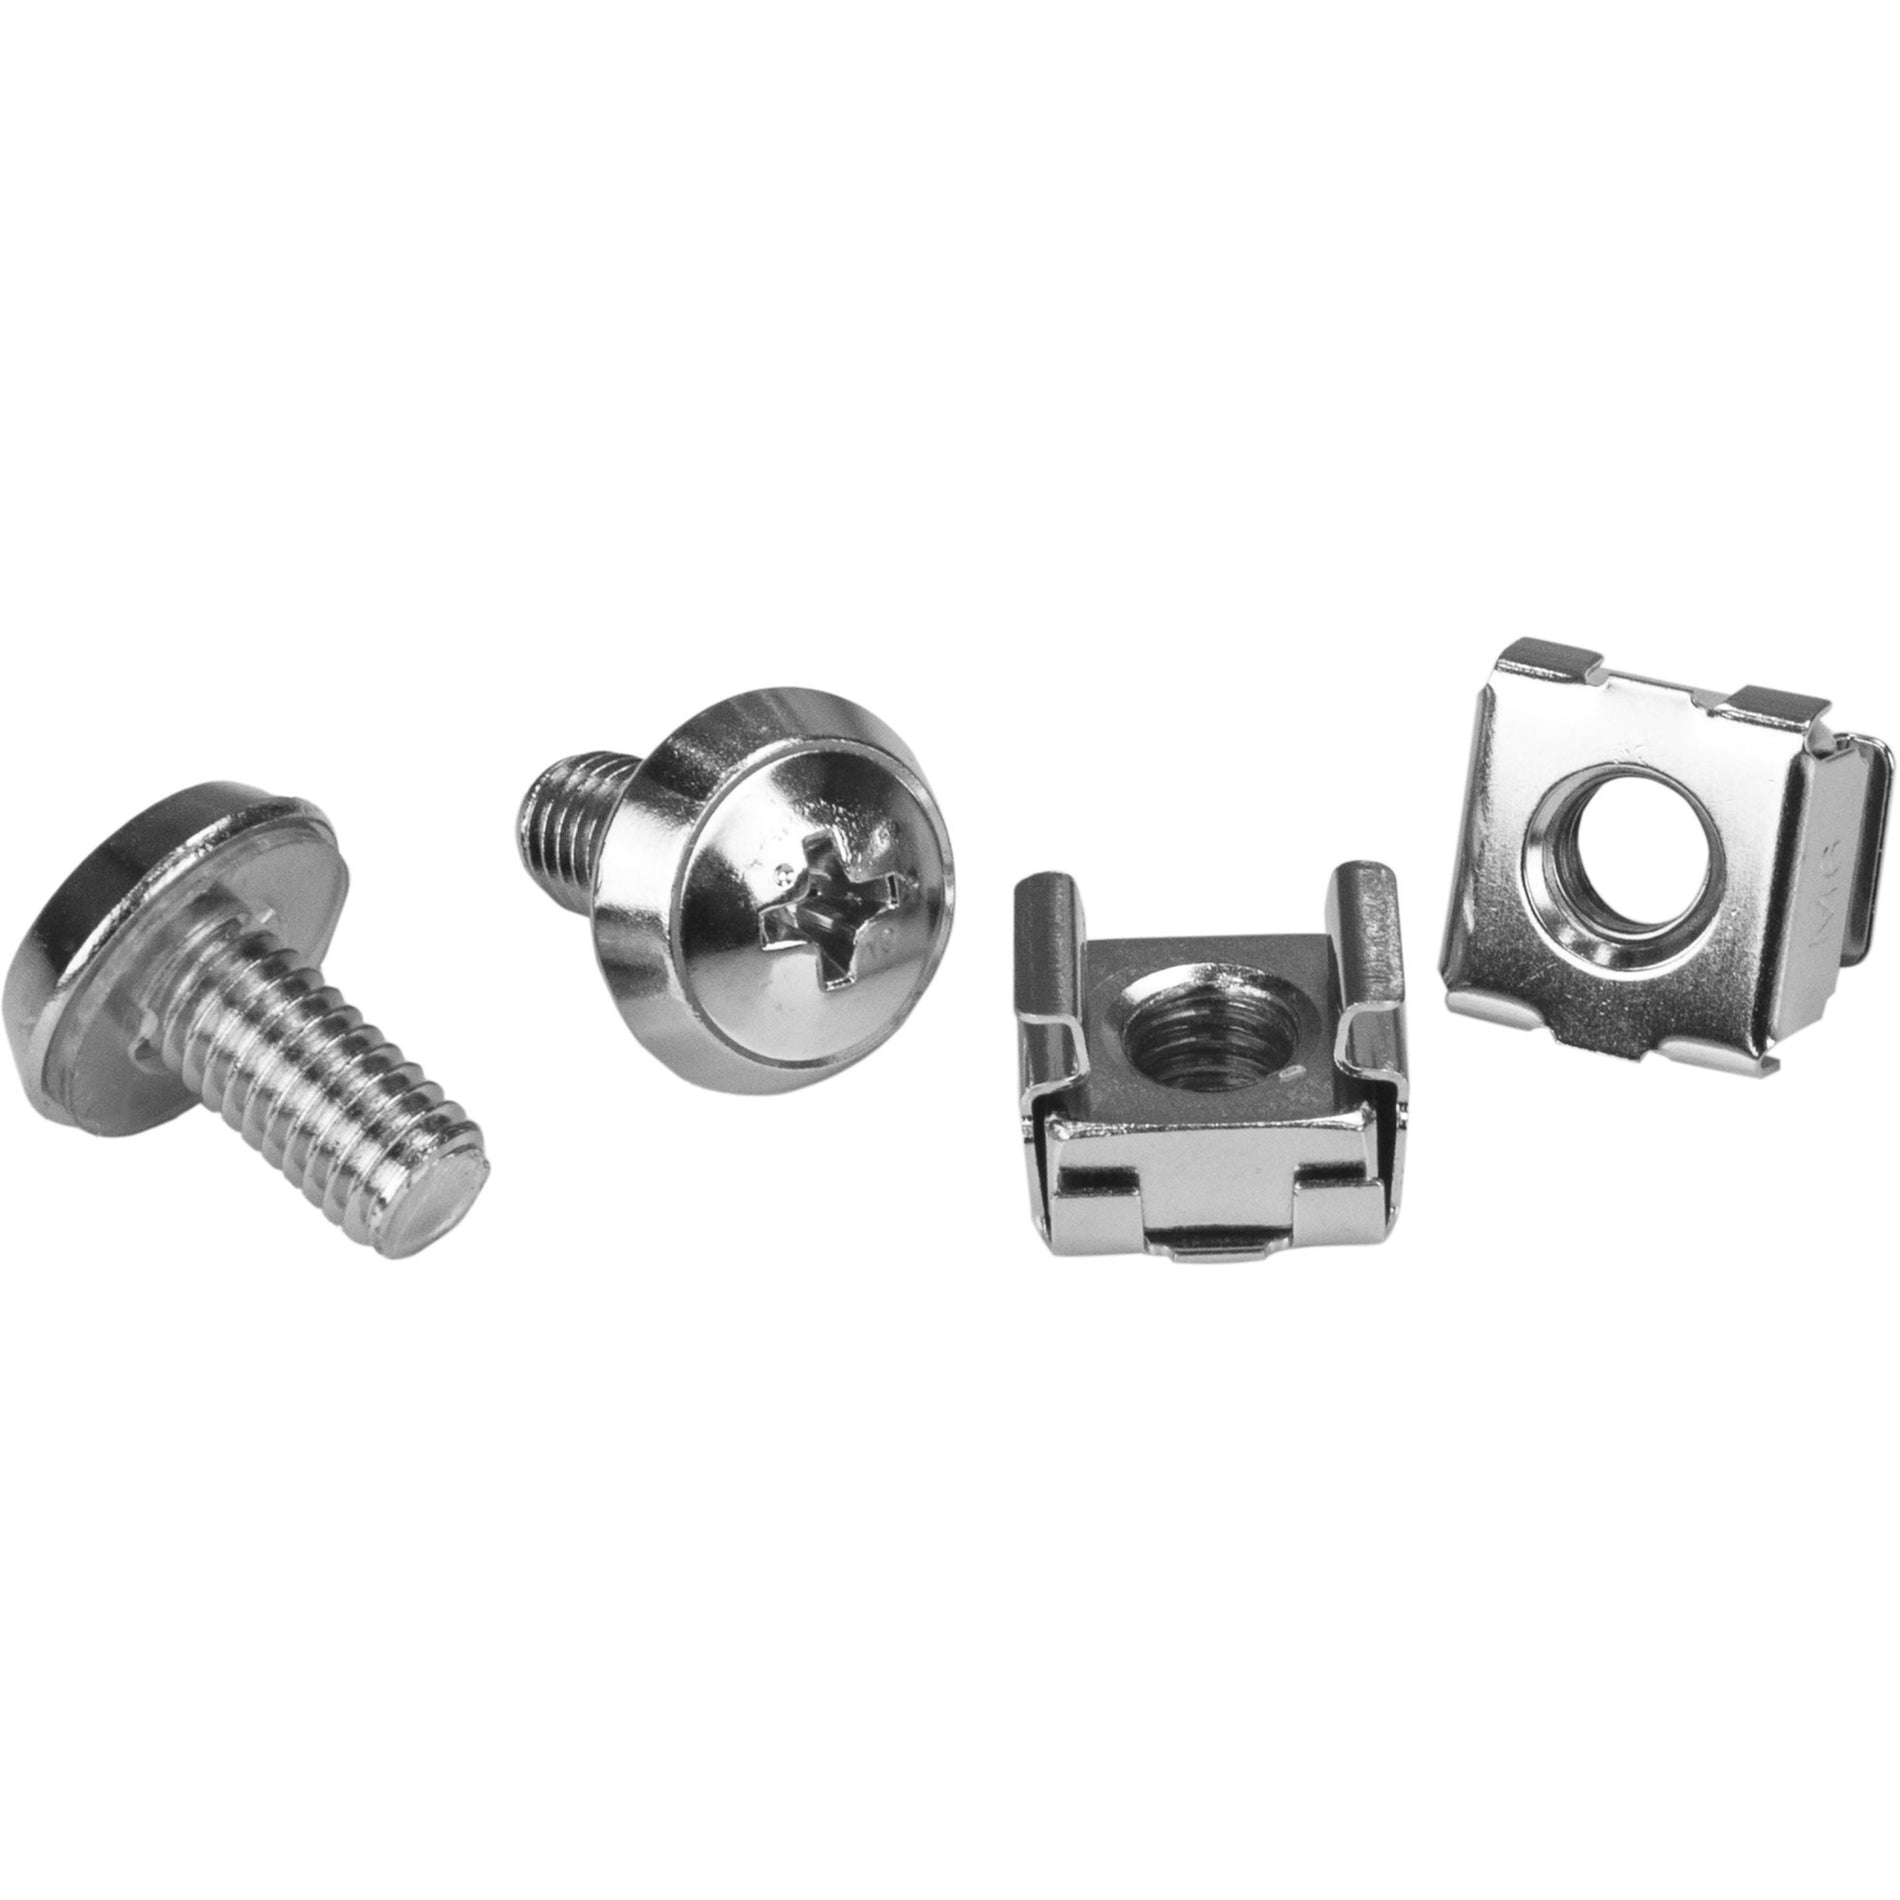 StarTech.com CABSCREWM62 100 Pkg M6 Mounting Screws and Cage Nuts for Server Rack Cabinet, Nickel Plated, Rust Resistant